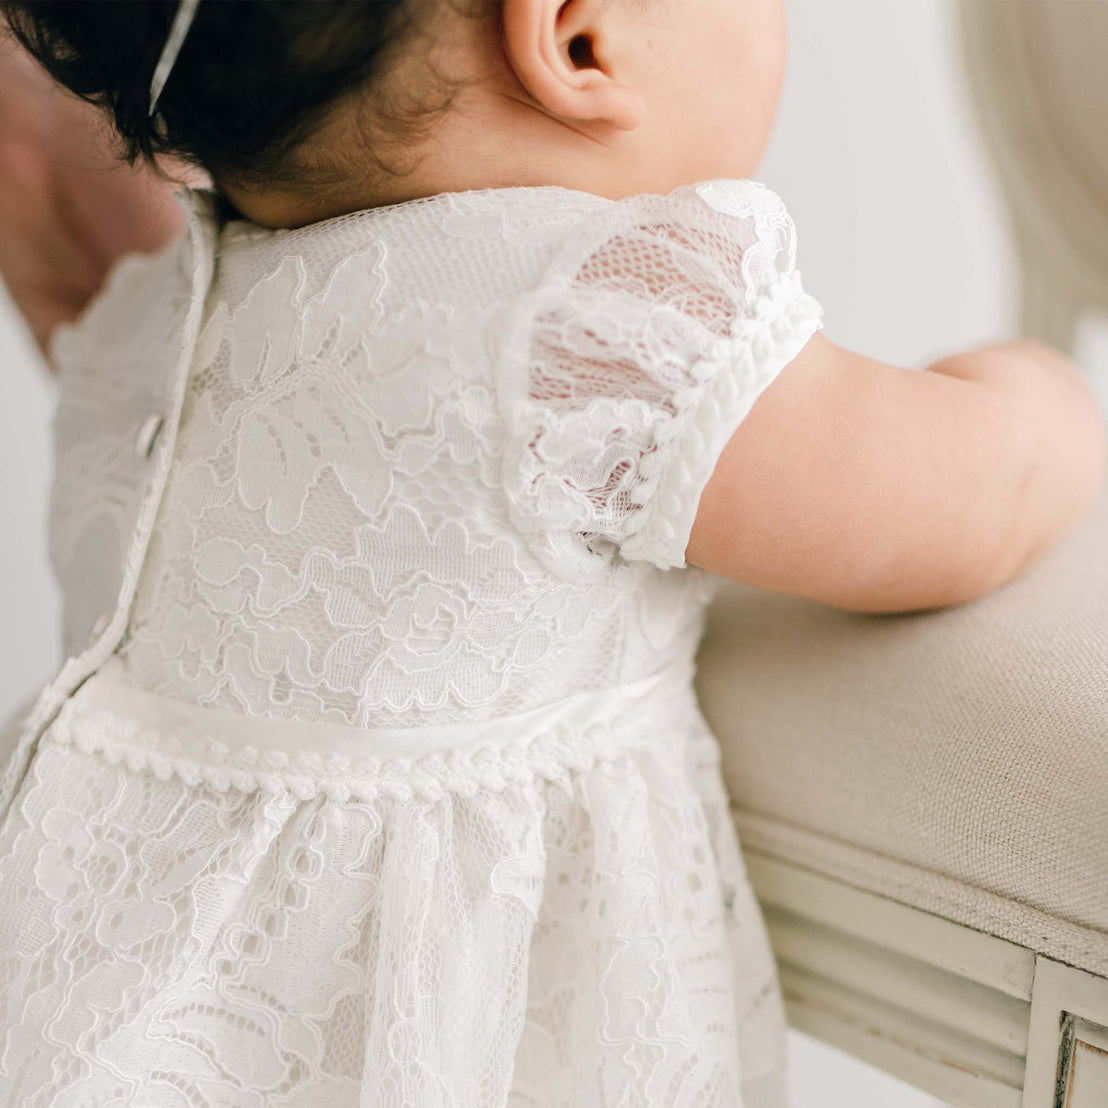 A close-up view of a baby wearing a Victoria Puff Sleeve Christening Dress, focusing on the delicate fabric details and the baby's tiny arm.